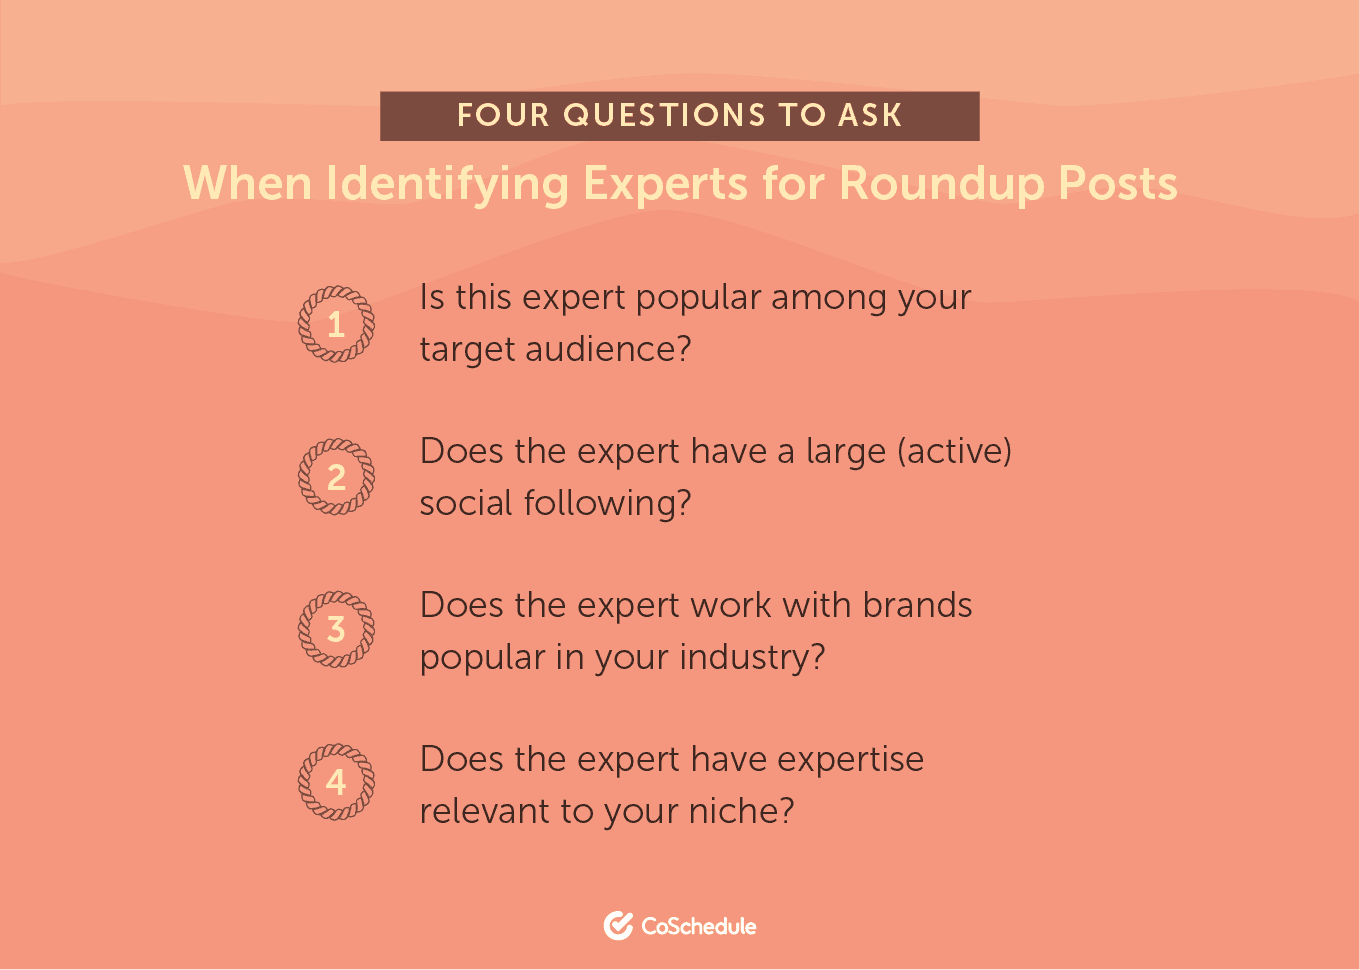 Four Questions to Ask When Identifying Experts for Roundup Posts